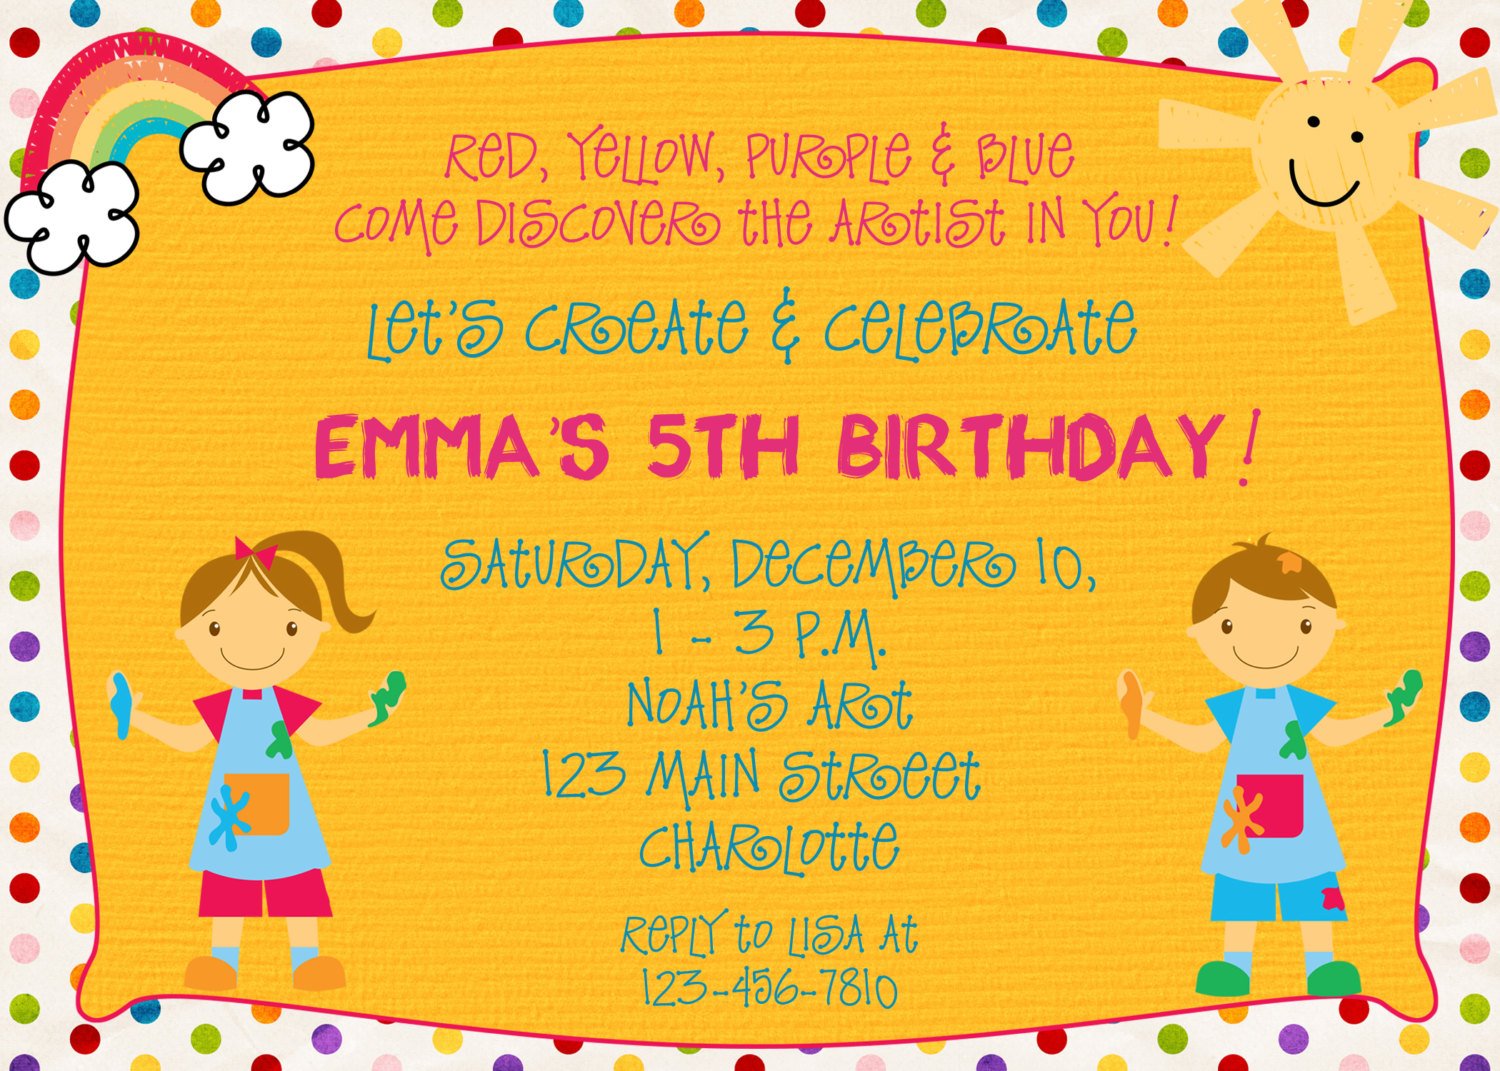 kids arts and crafts birthday party invitations